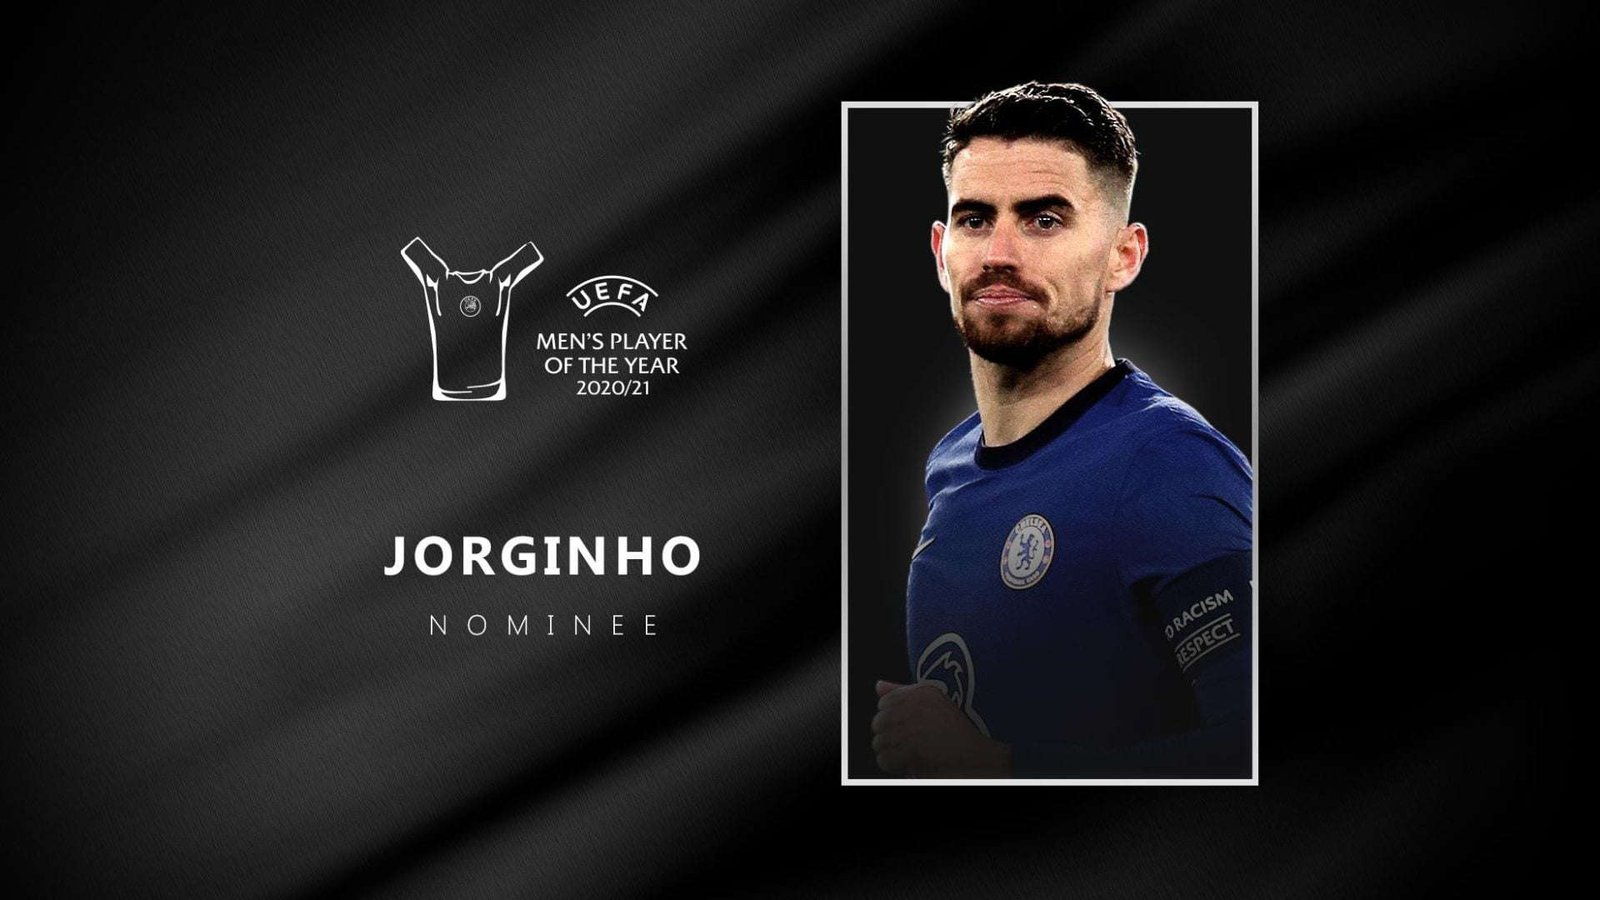 Jorginho secures the UEFA player of the year title